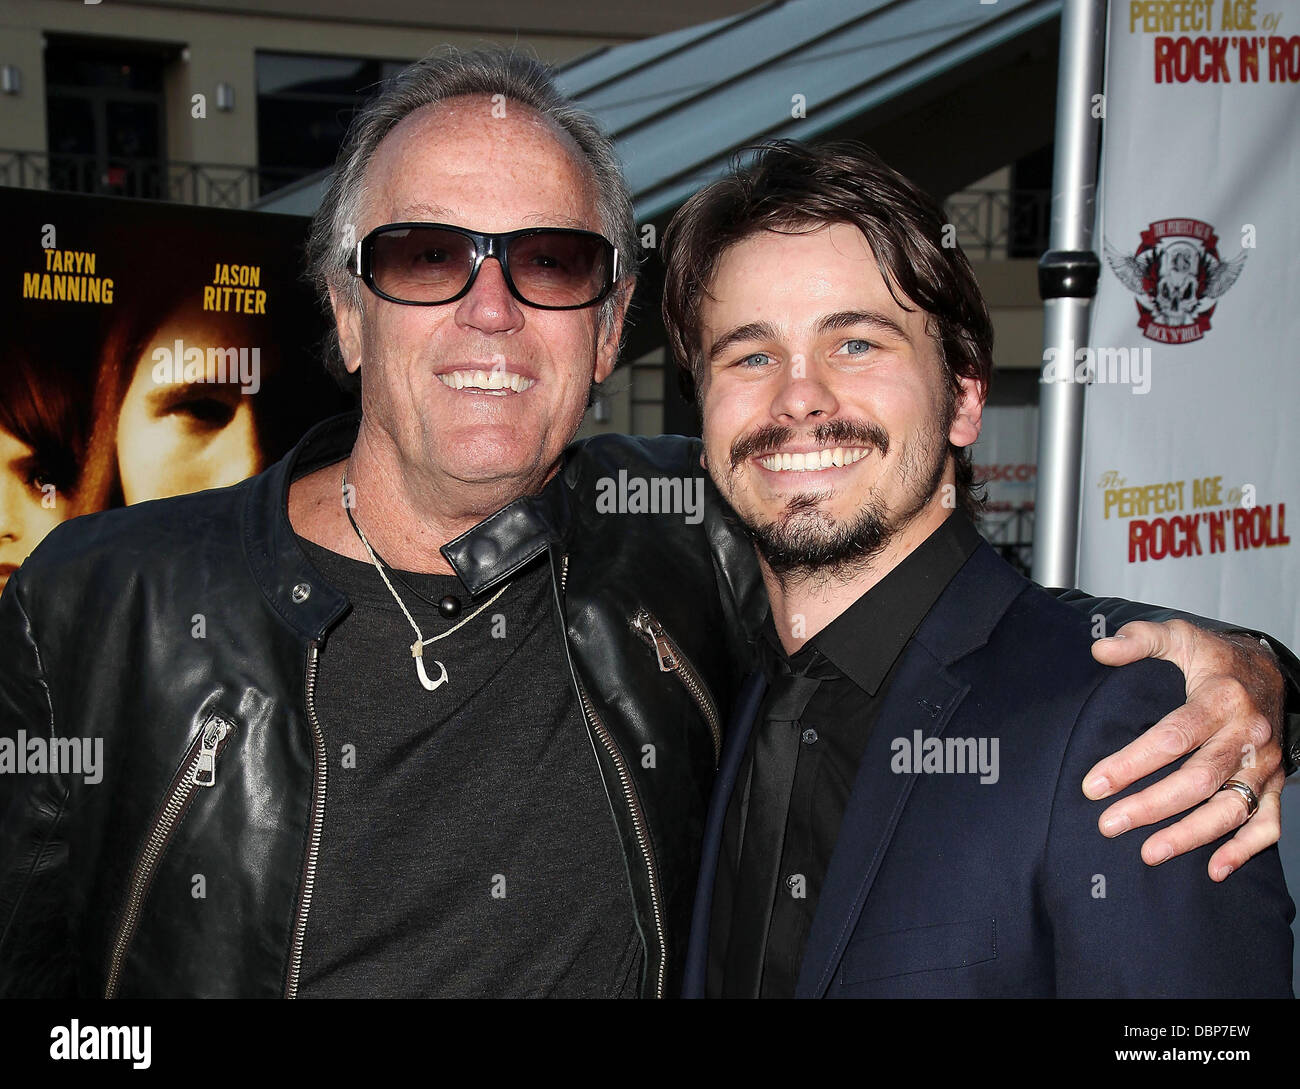 Peter Fonda (L) and Jason Ritter 'The Perfect Age Of Rock 'N' Roll' Los Angeles Premiere held at Laemmle Sunset 5 Theatre West Hollywood, California - 3.08.11 Stock Photo